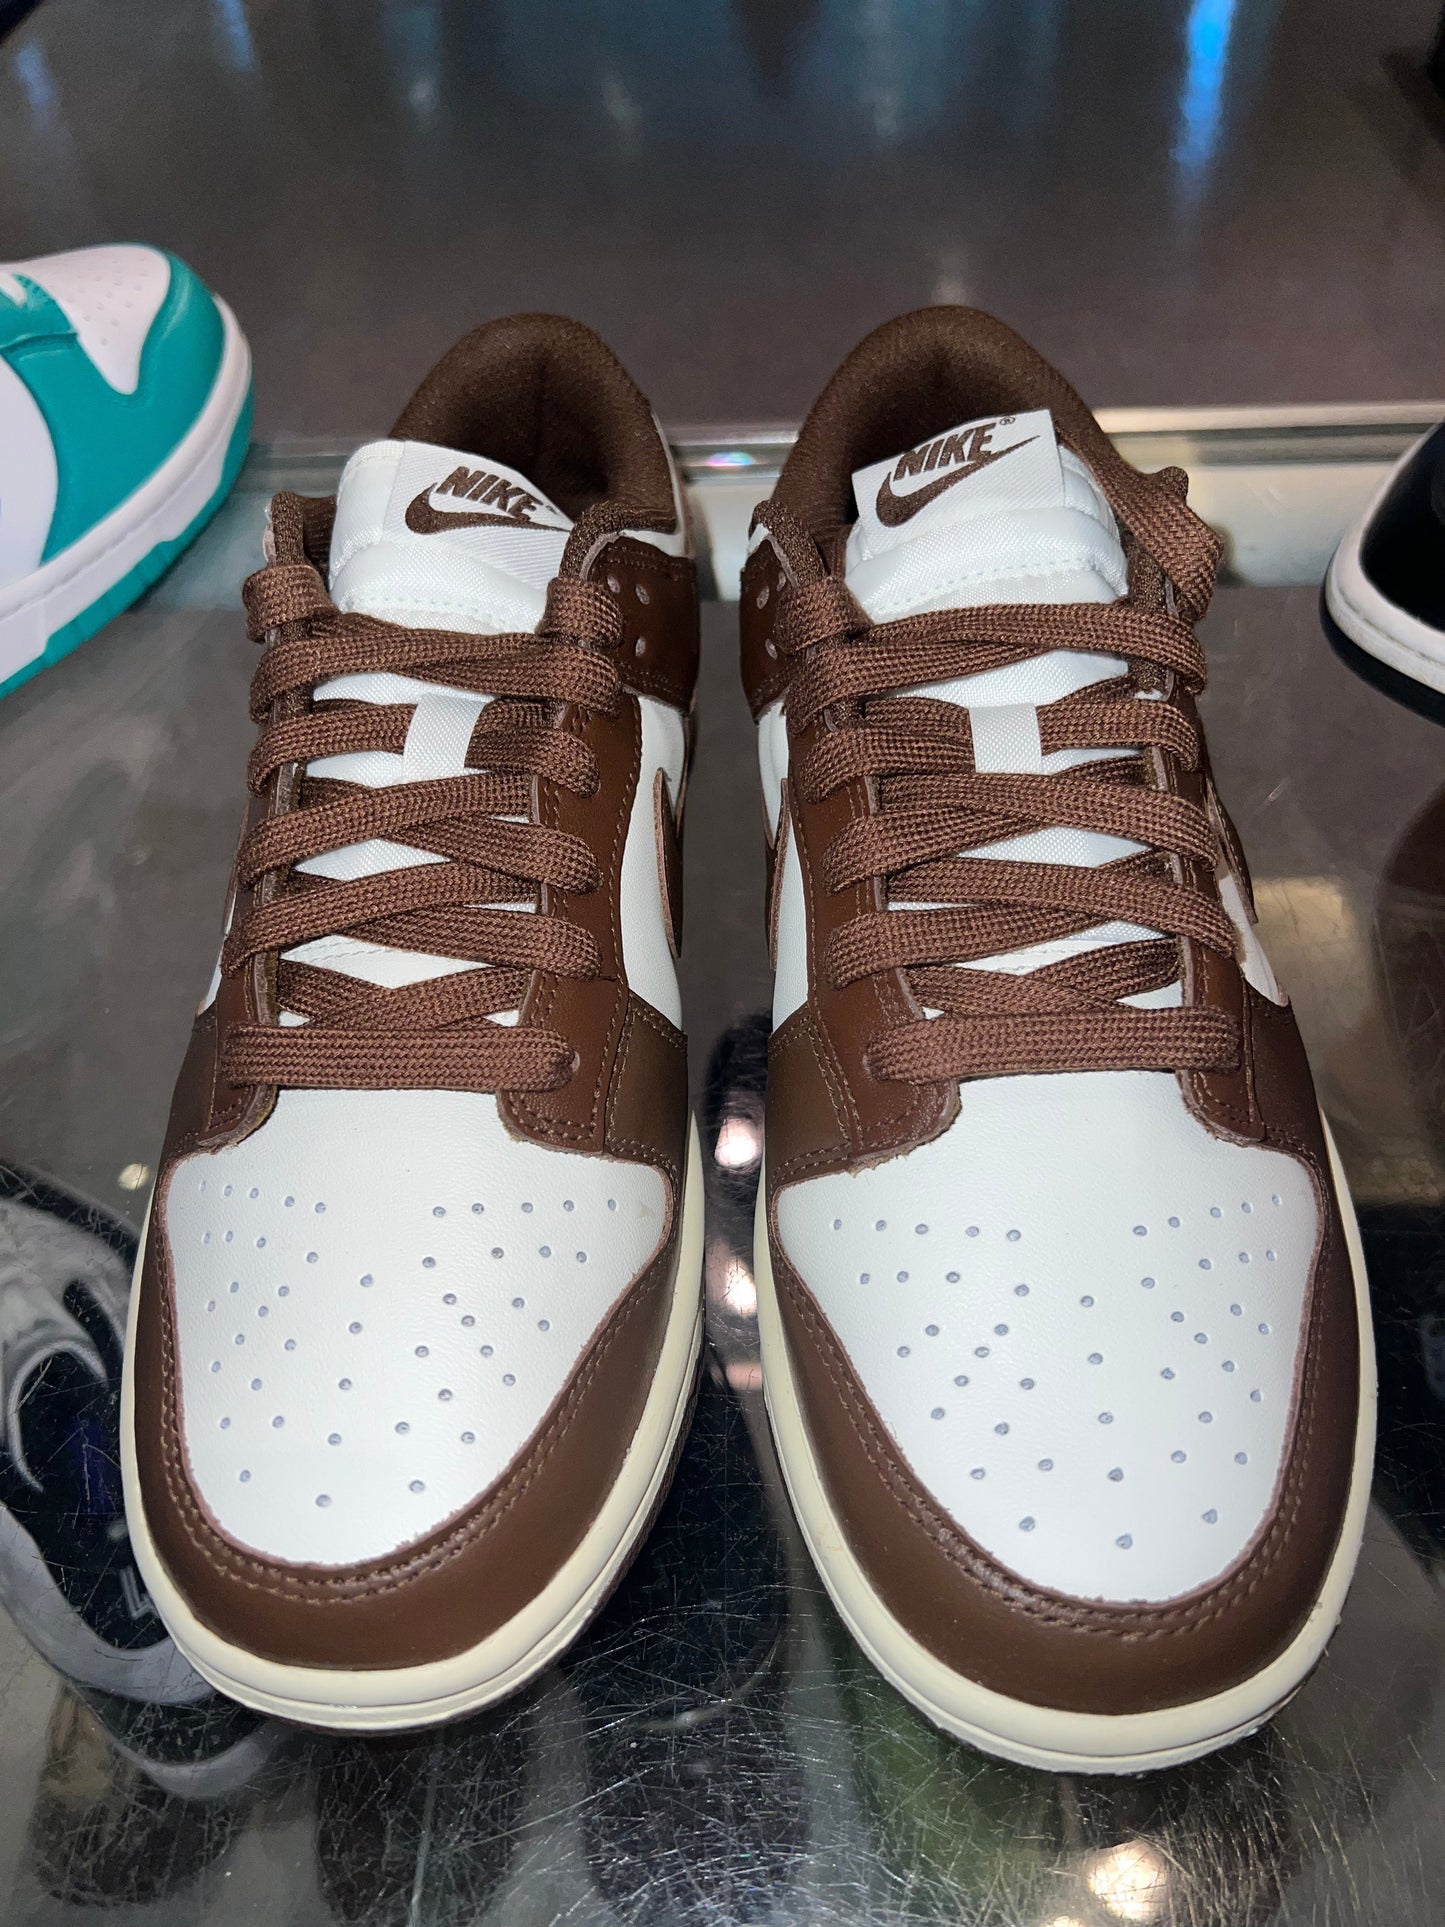 Size 8.5 (10W) Dunk Low “Cacao Wow” Brand New (Mall)